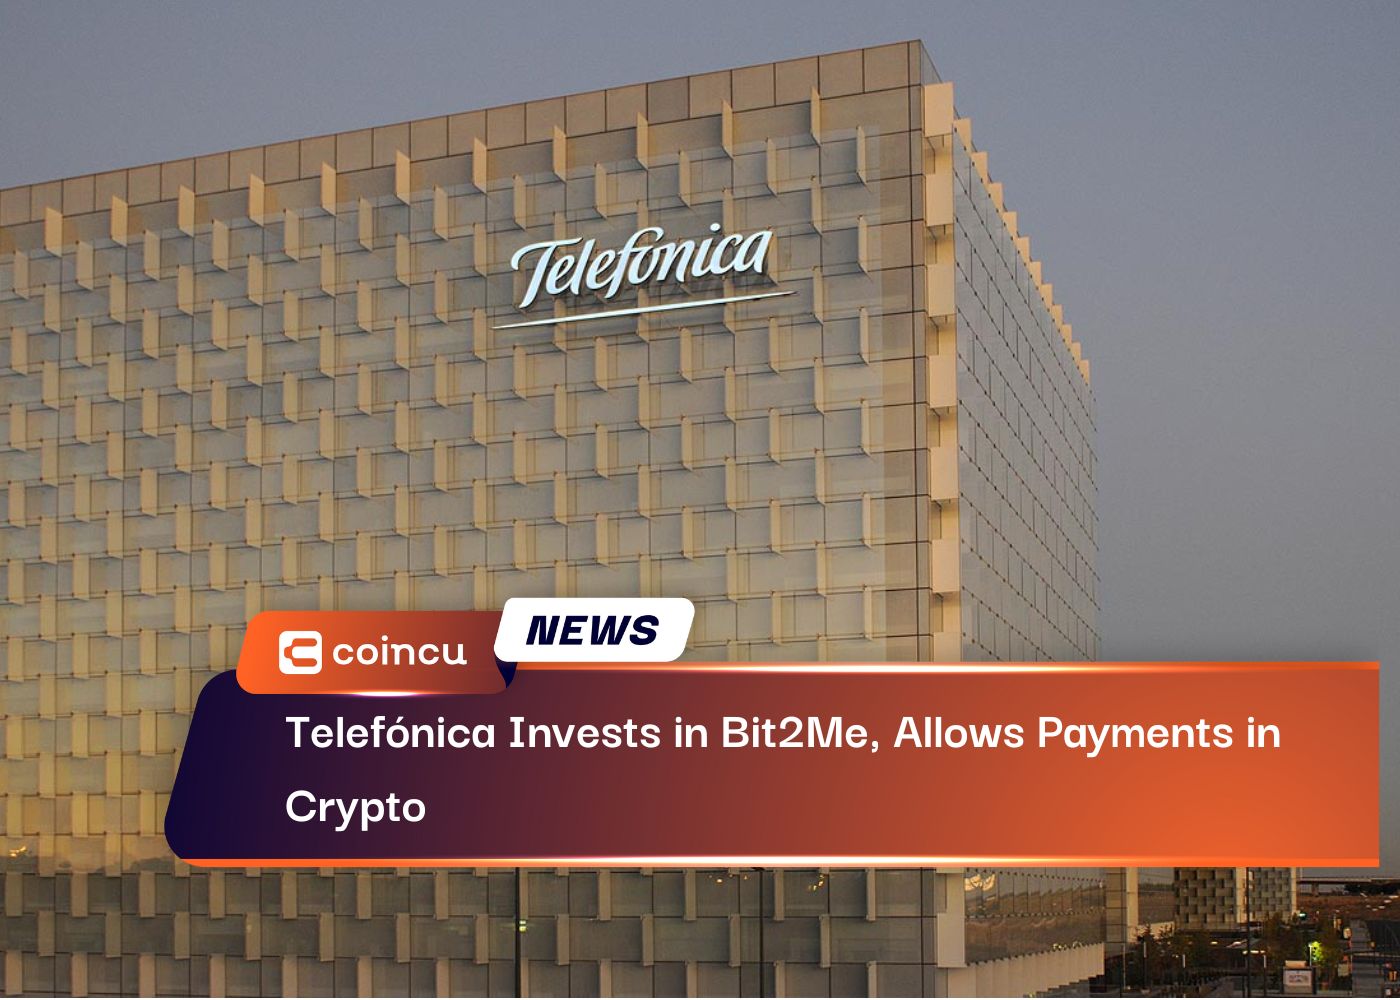 Telefónica Invests in Bit2Me, Allows Payments in Crypto